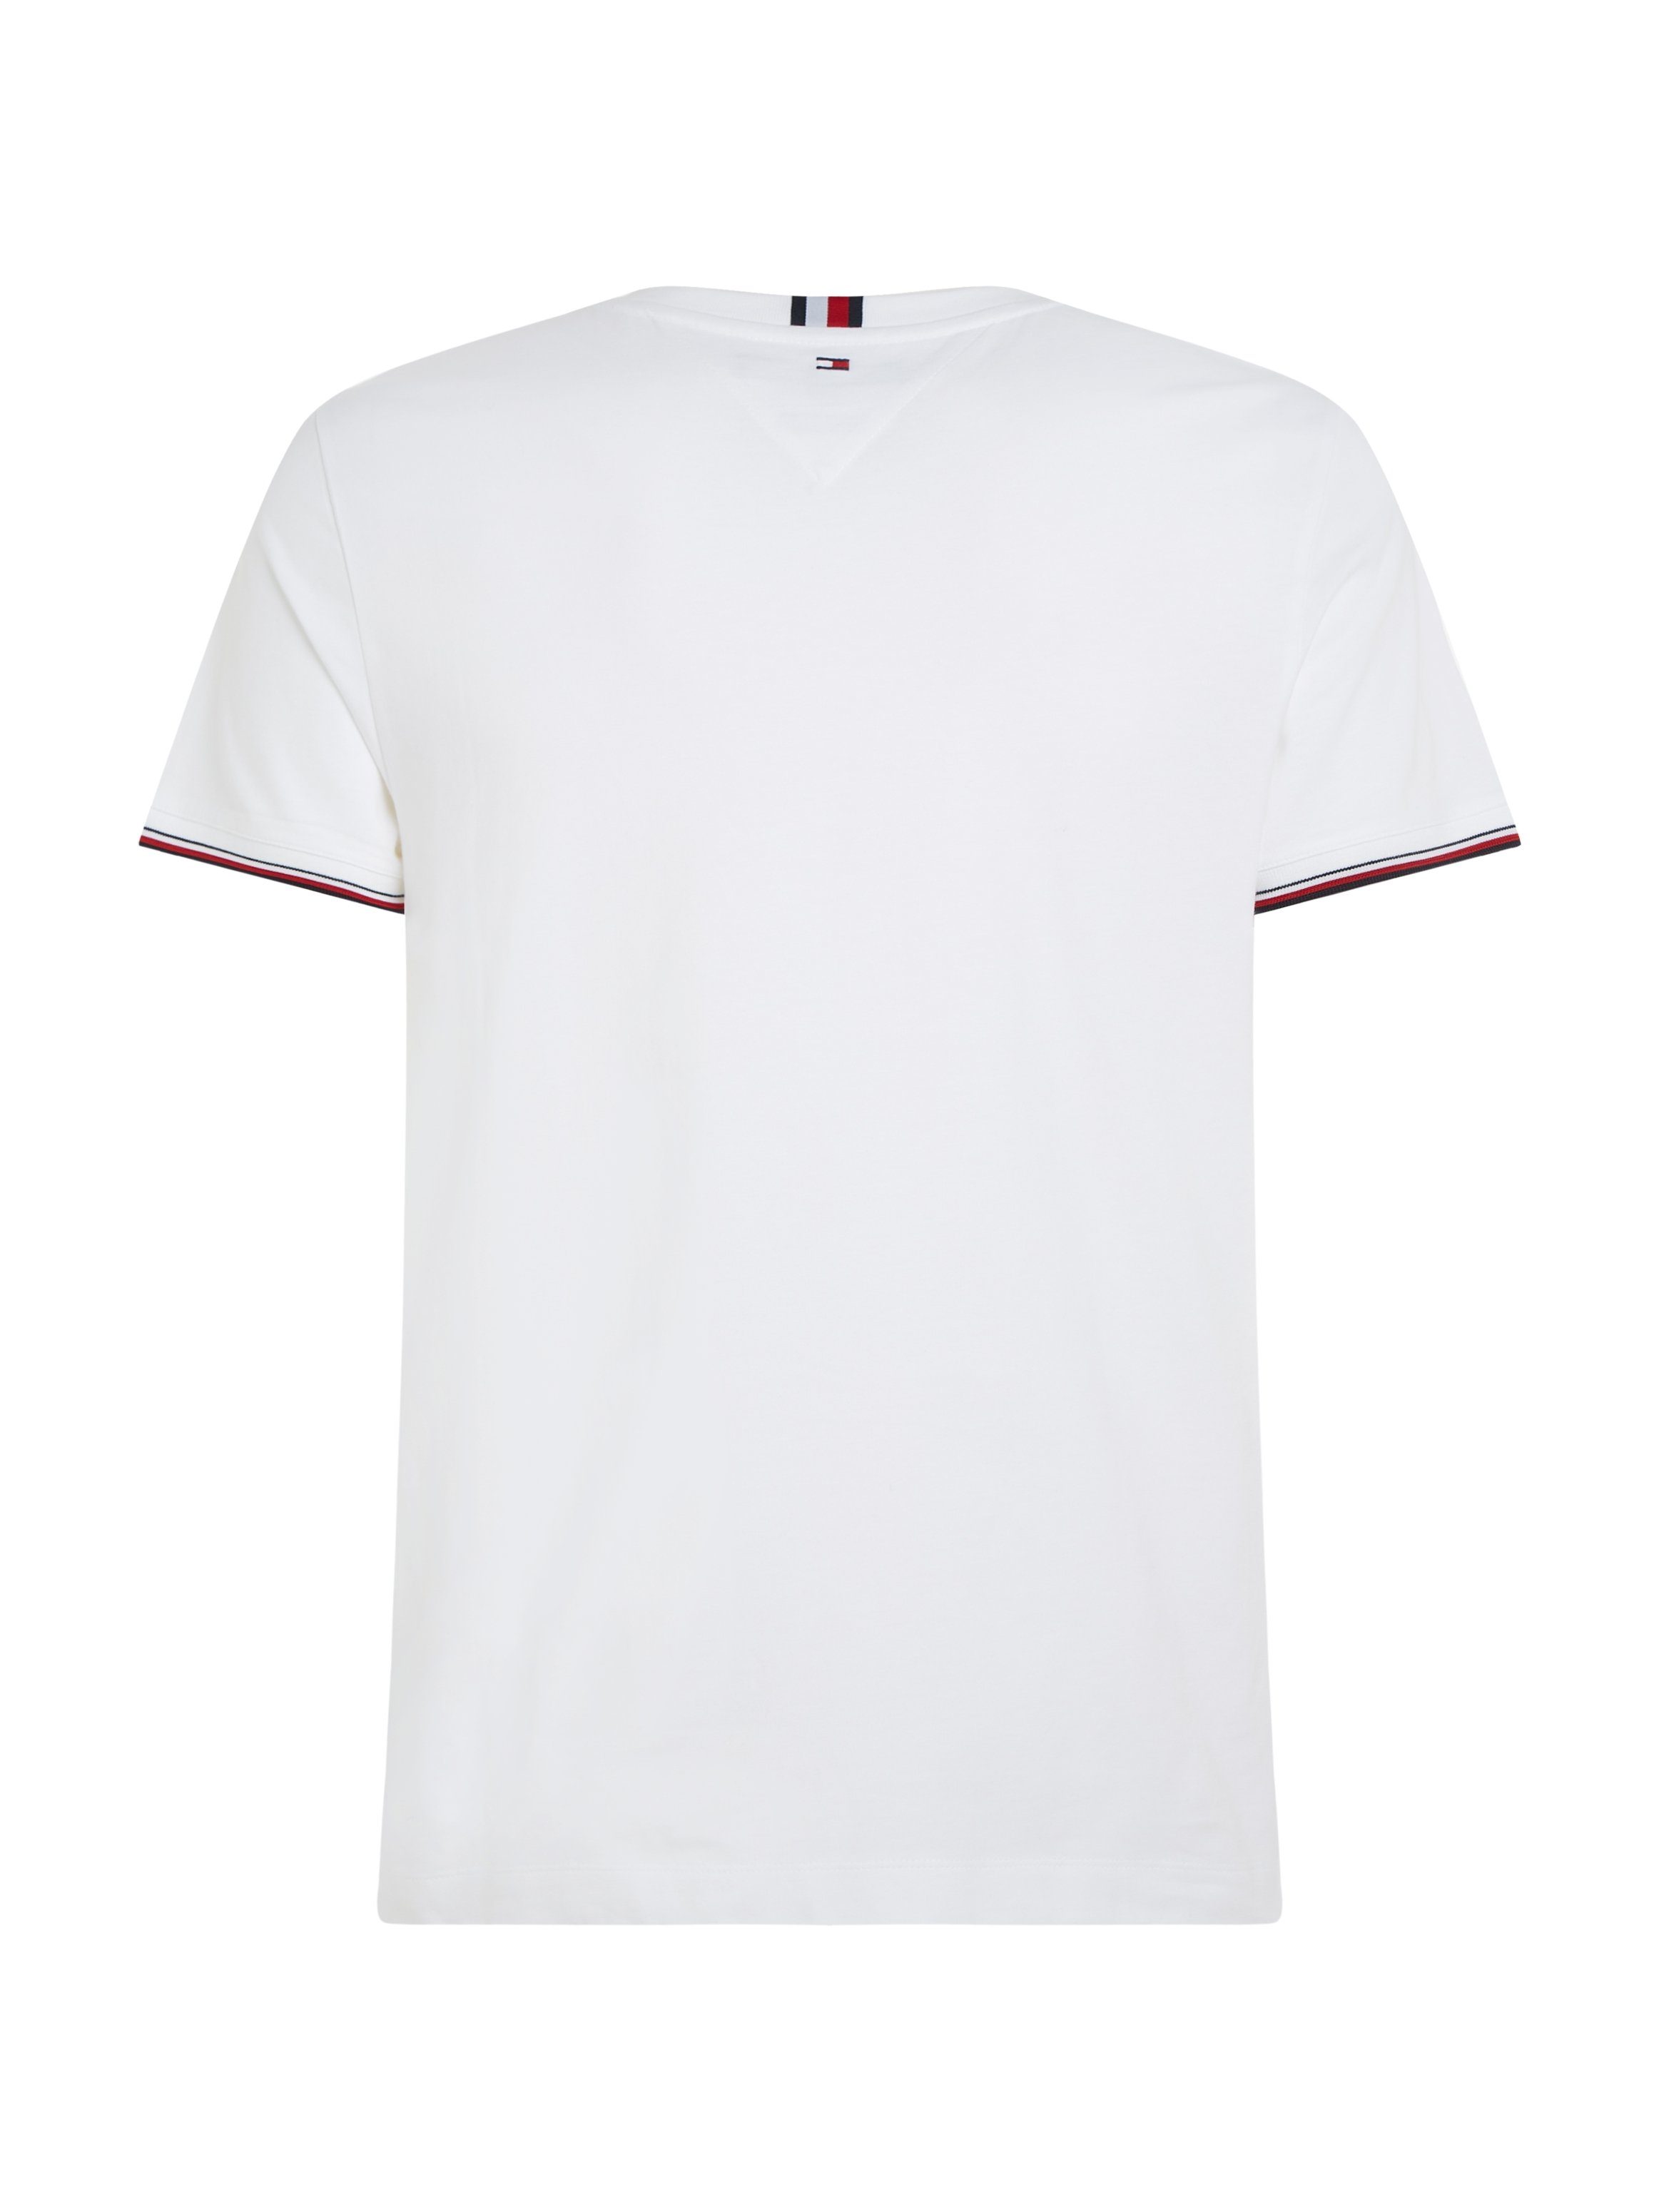 T-Shirt Tommy TEE LOGO TOMMY Hilfiger White TIPPED